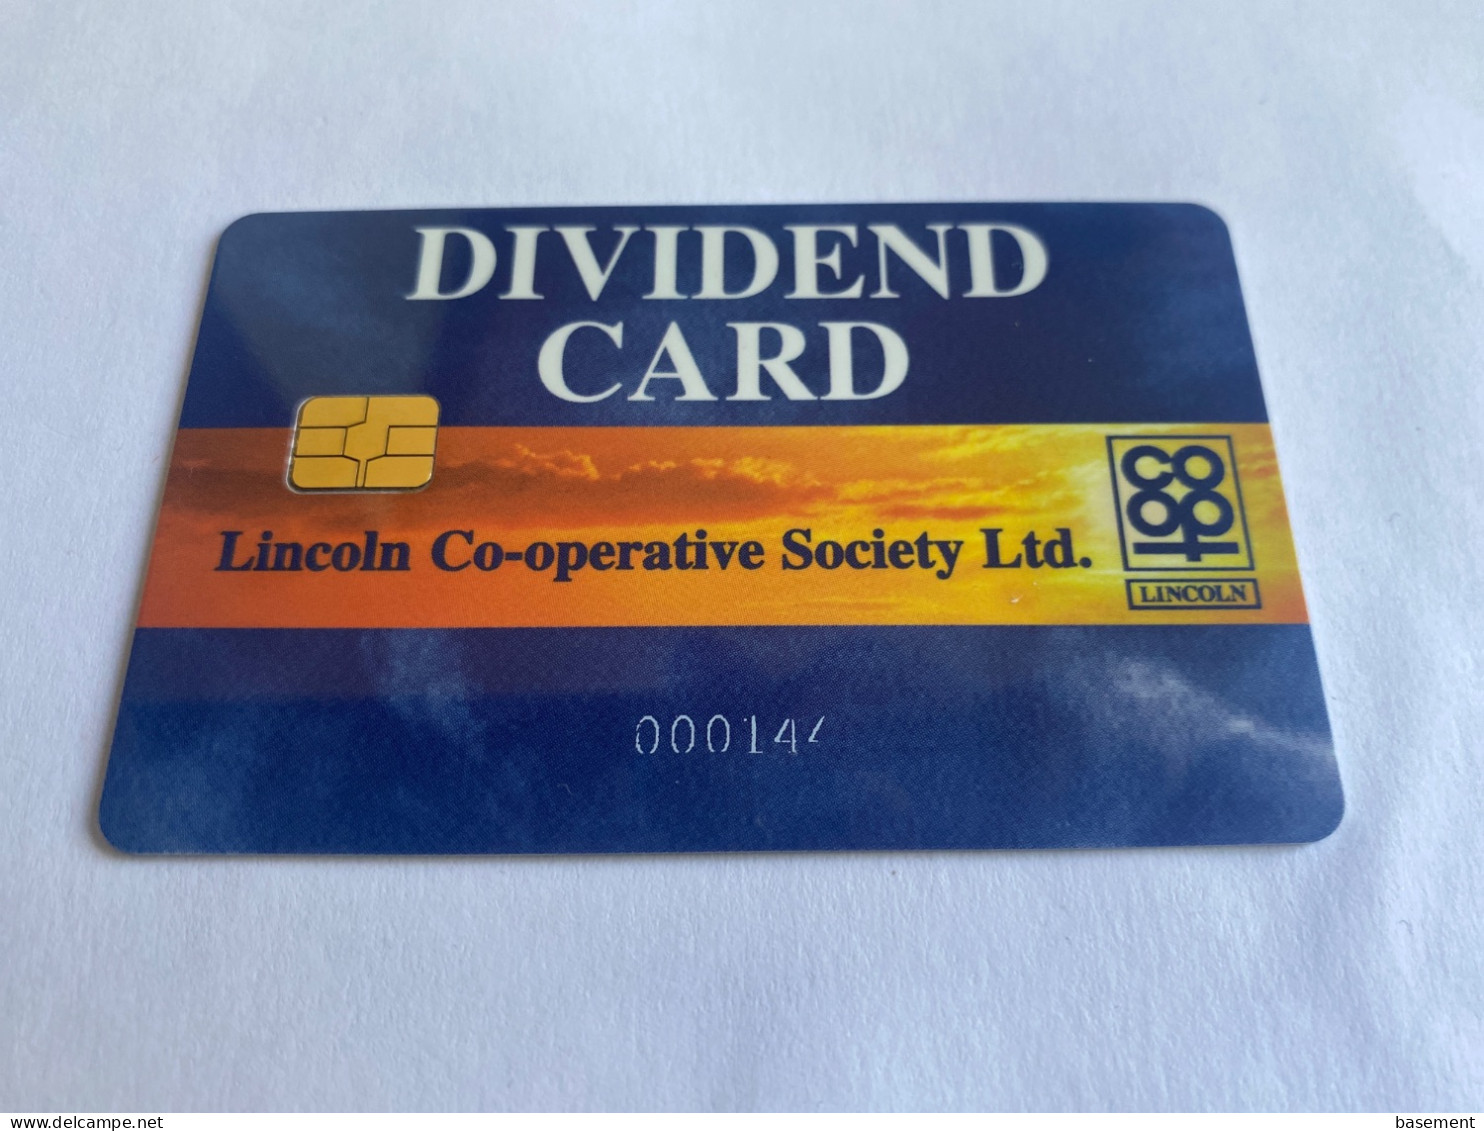 1:090 - Chip Card Dividend Card - Credit Cards (Exp. Date Min. 10 Years)